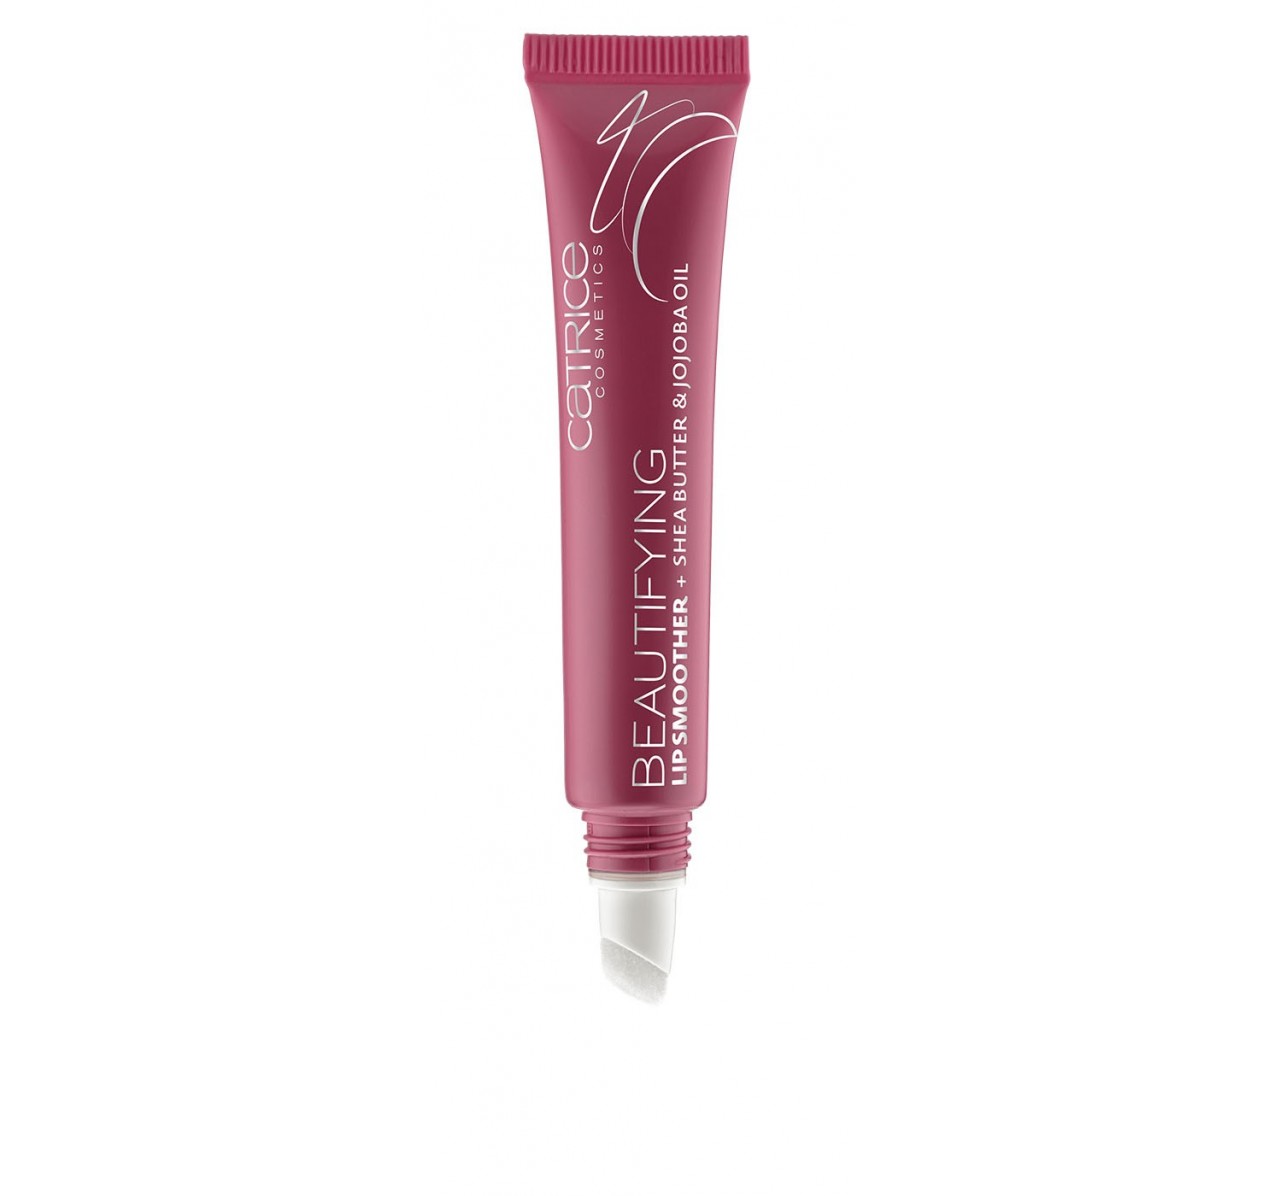 CATRICE EMBELLECEDOR LABIAL BEAUTIFYING LIP SMOOTHER 070 GREATEST MAUVE